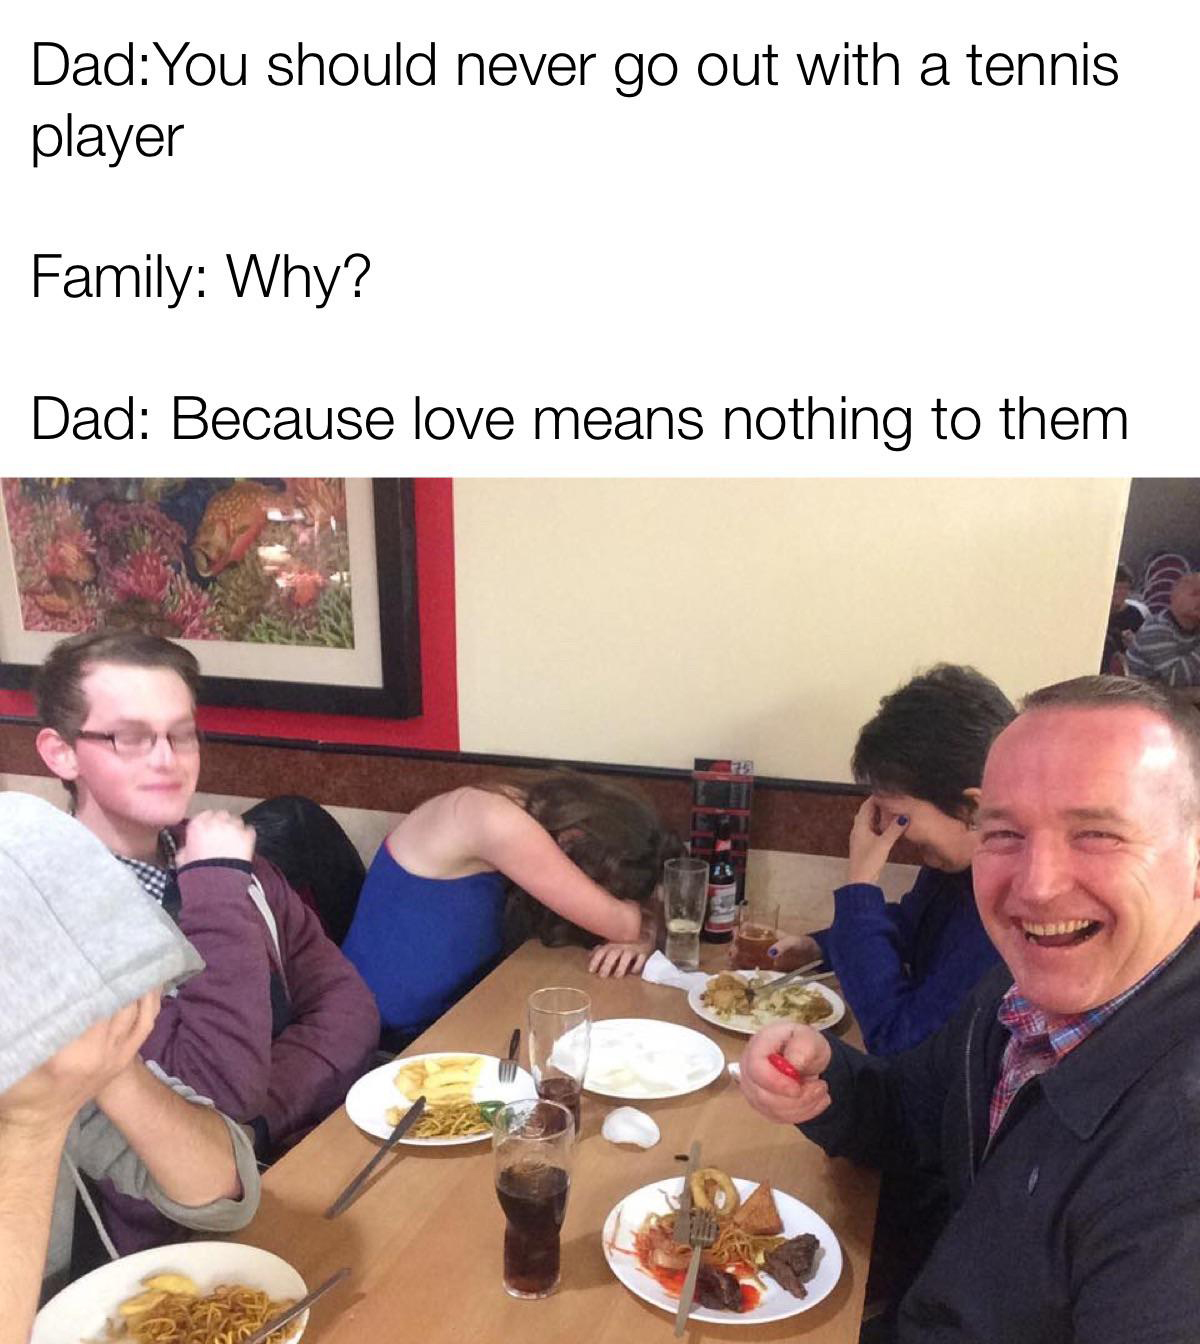 dad joke reaction - DadYou should never go out with a tennis player Family Why? Dad Because love means nothing to them